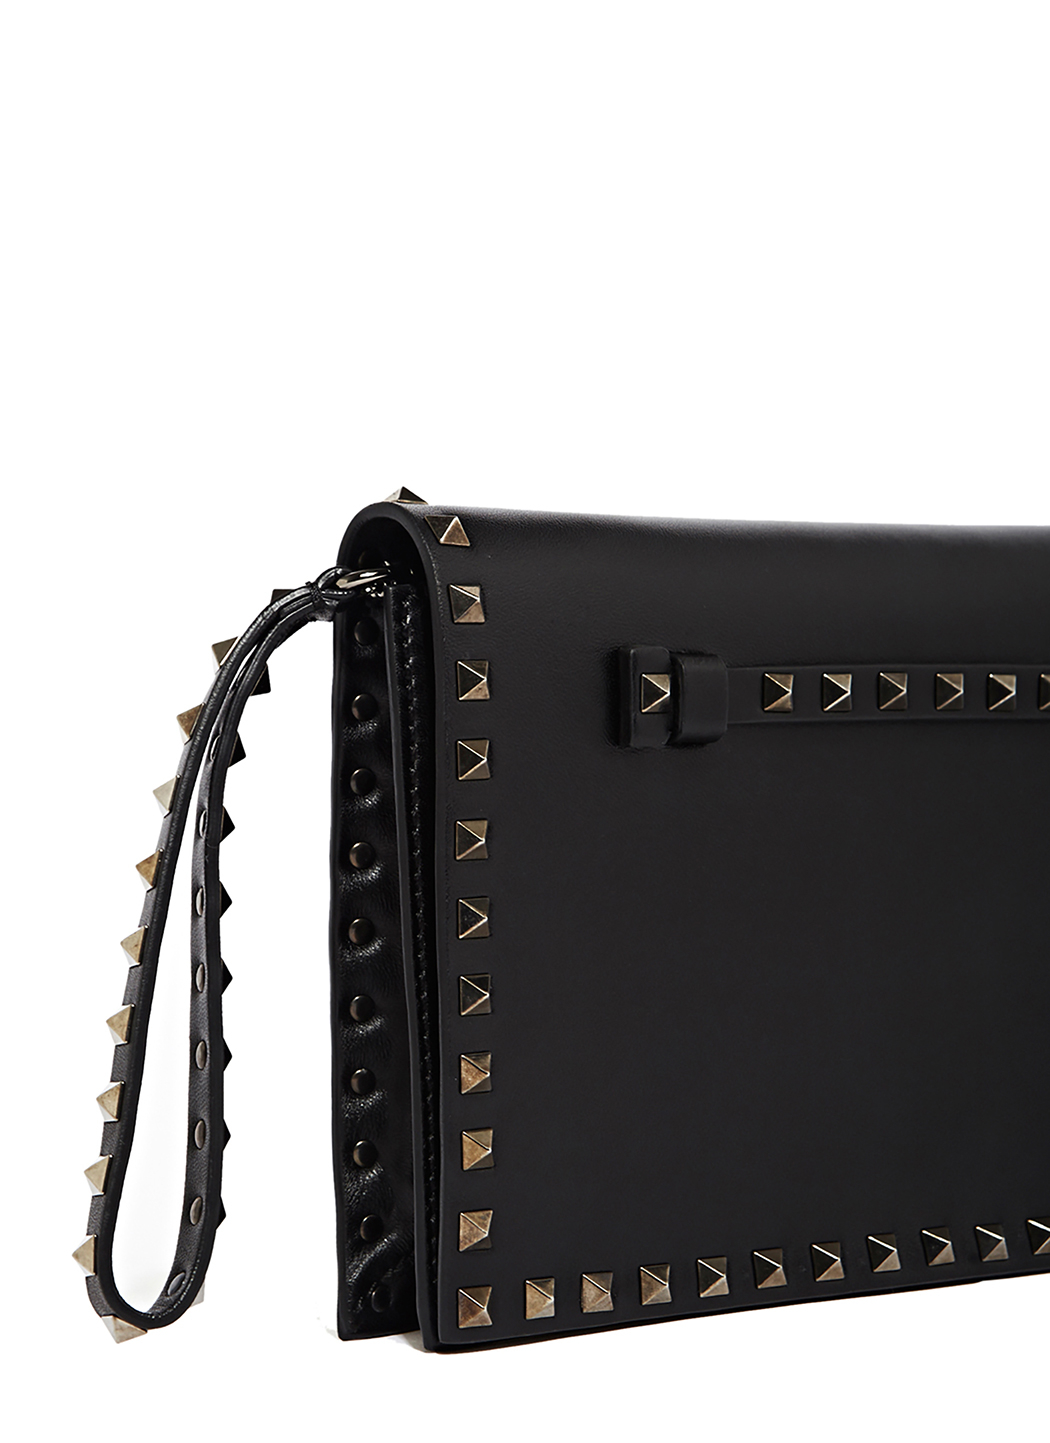 Lyst - Valentino Studded Leather Clutch Bag in Black